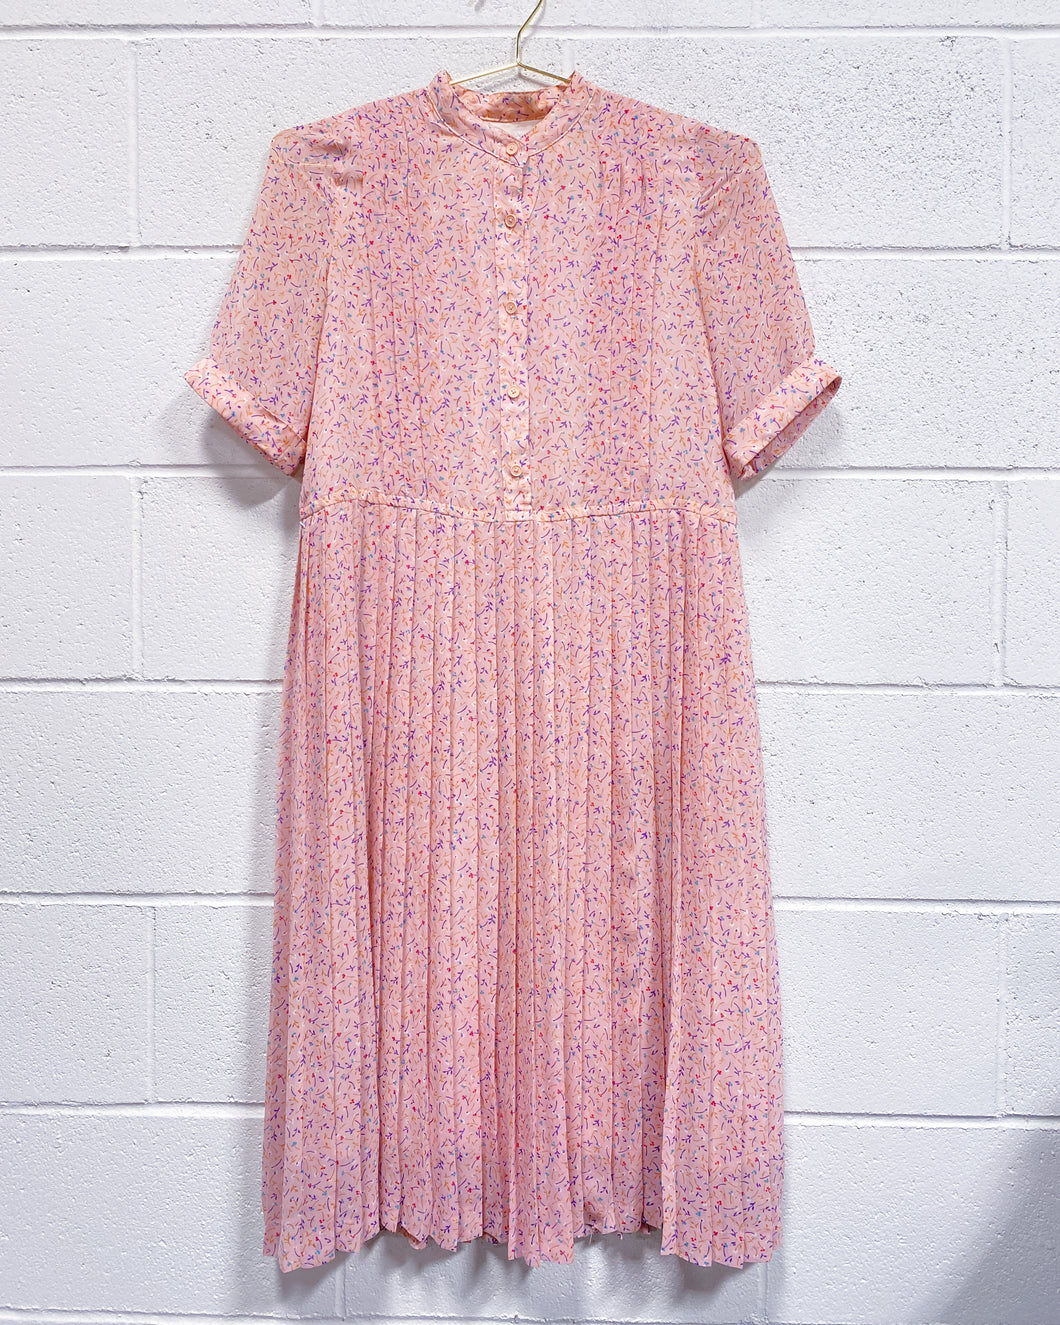 Vintage Pretty Pink Dress with Small Flowers